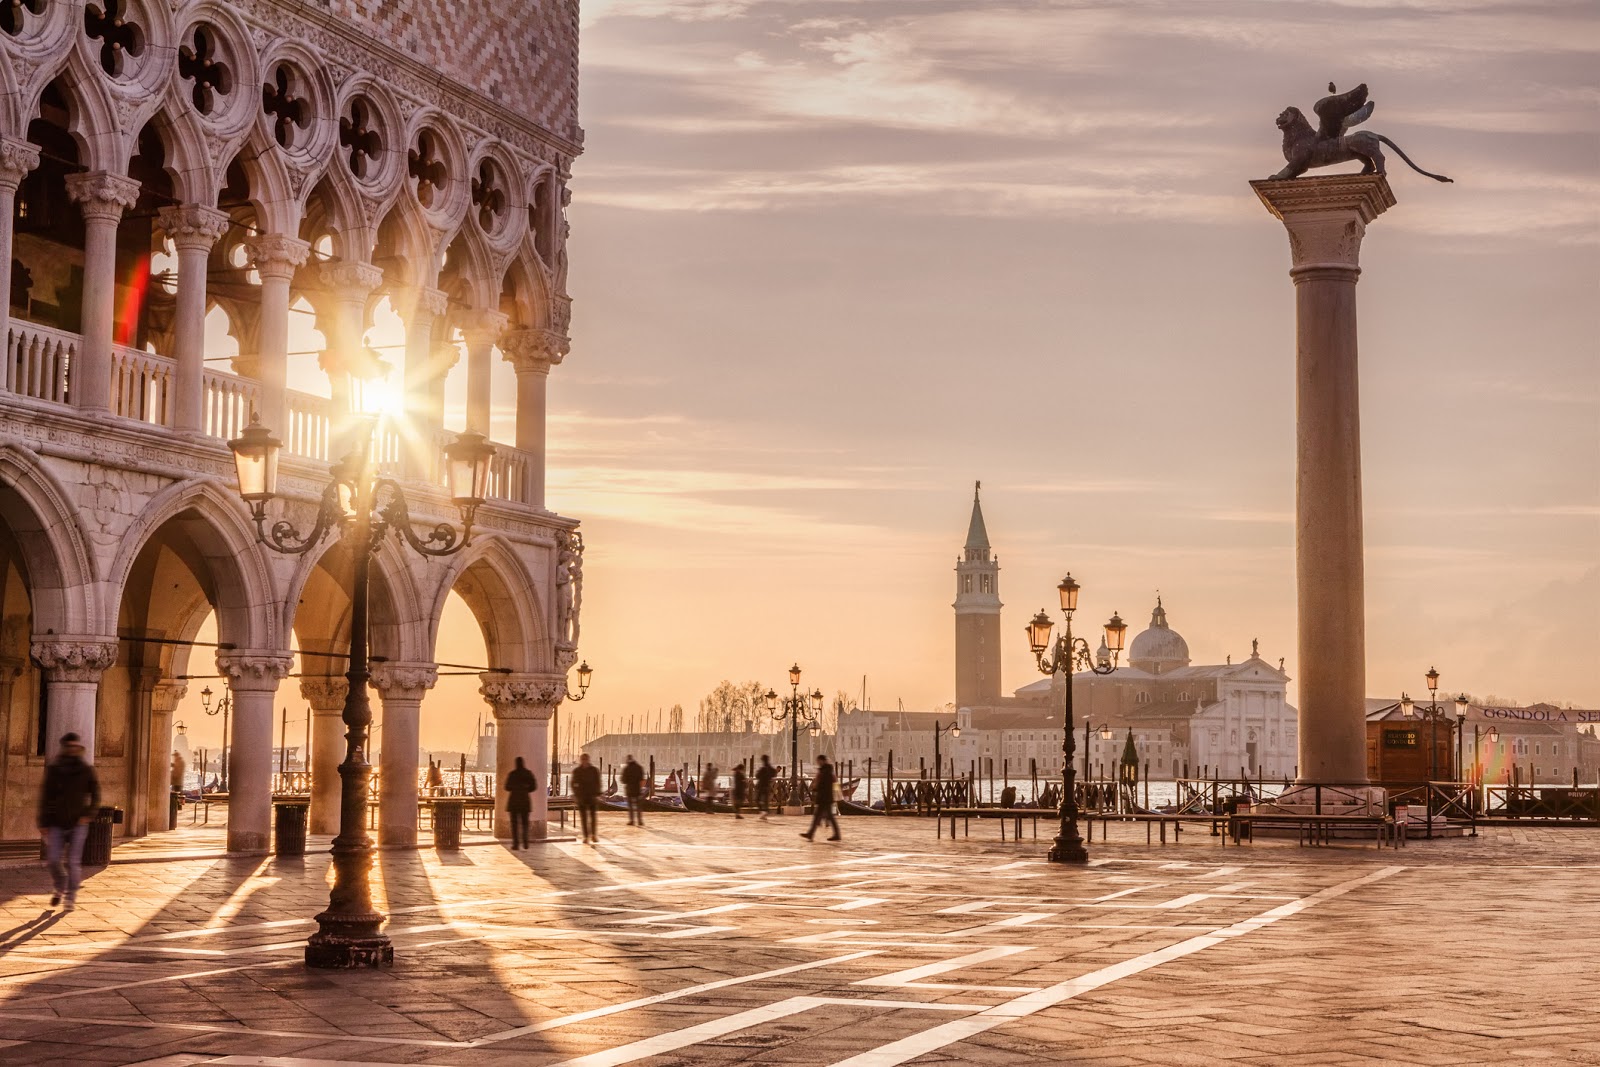 Why is Venice called the city of love?